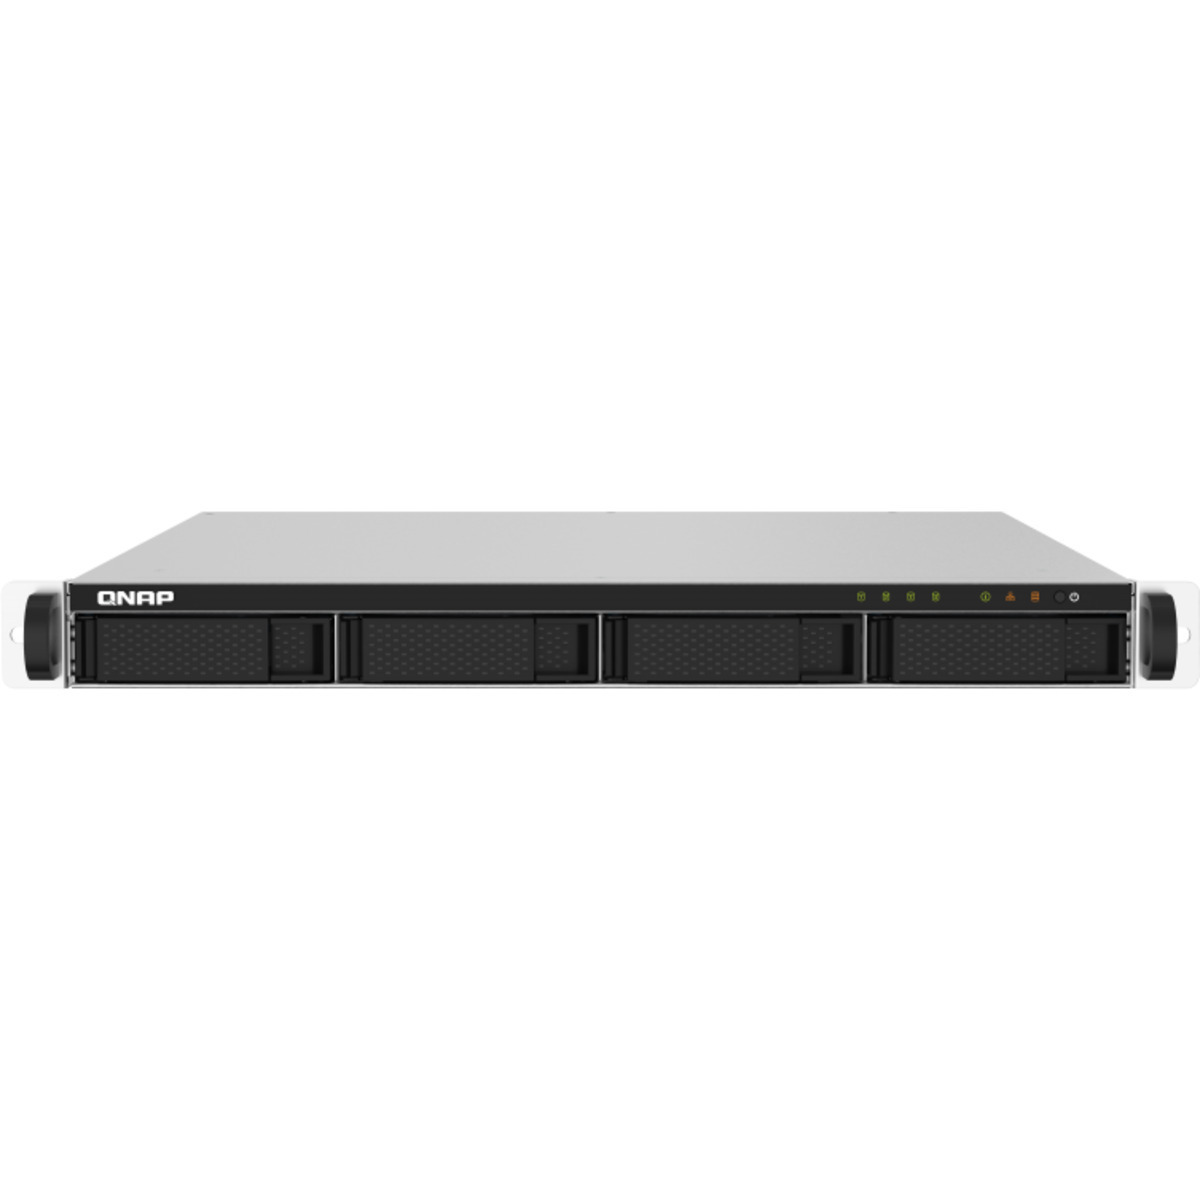 QNAP TS-432PXU 18tb 4-Bay RackMount Personal / Basic Home / Small Office NAS - Network Attached Storage Device 3x6tb Seagate IronWolf ST6000VN006 3.5 5400rpm SATA 6Gb/s HDD NAS Class Drives Installed - Burn-In Tested - FREE RAM UPGRADE TS-432PXU